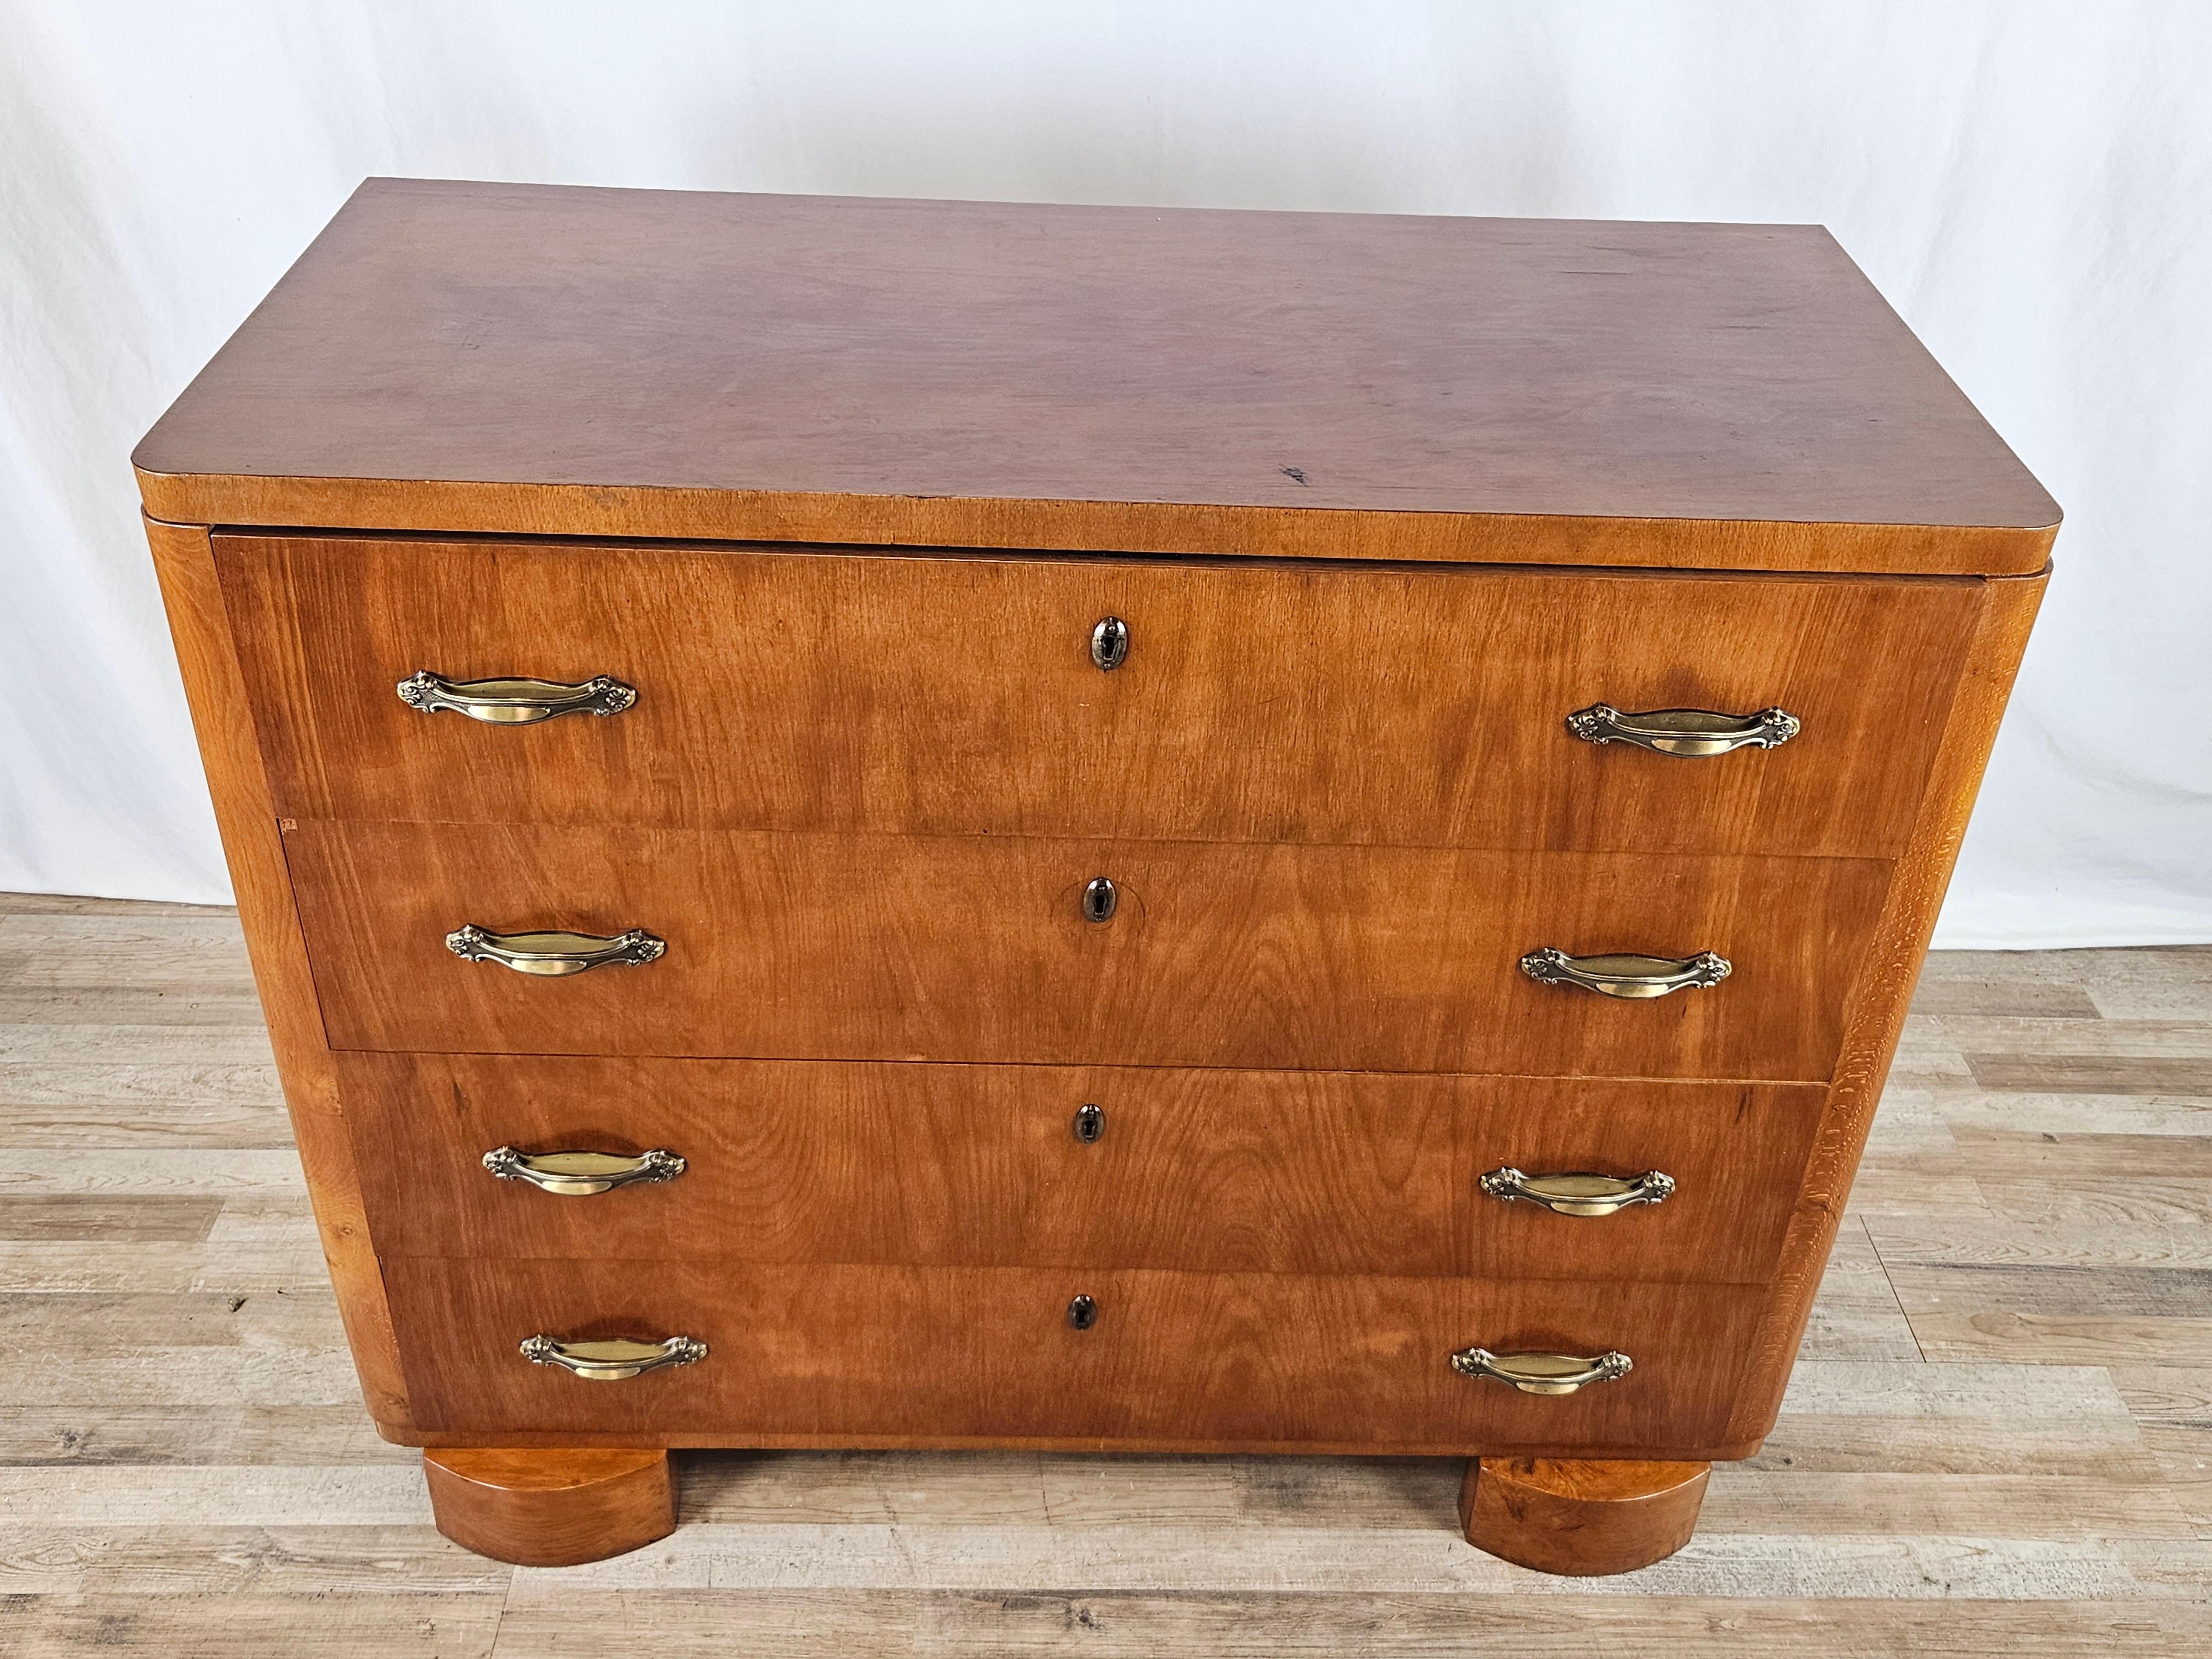 Chamber dresser made circa 1940 entirely of wood with four large, sturdy drawers.

The cabinet lends itself well to all kinds of environments thanks to its small size and soft, gentle wood tone.

Brass handles placed after the furniture was